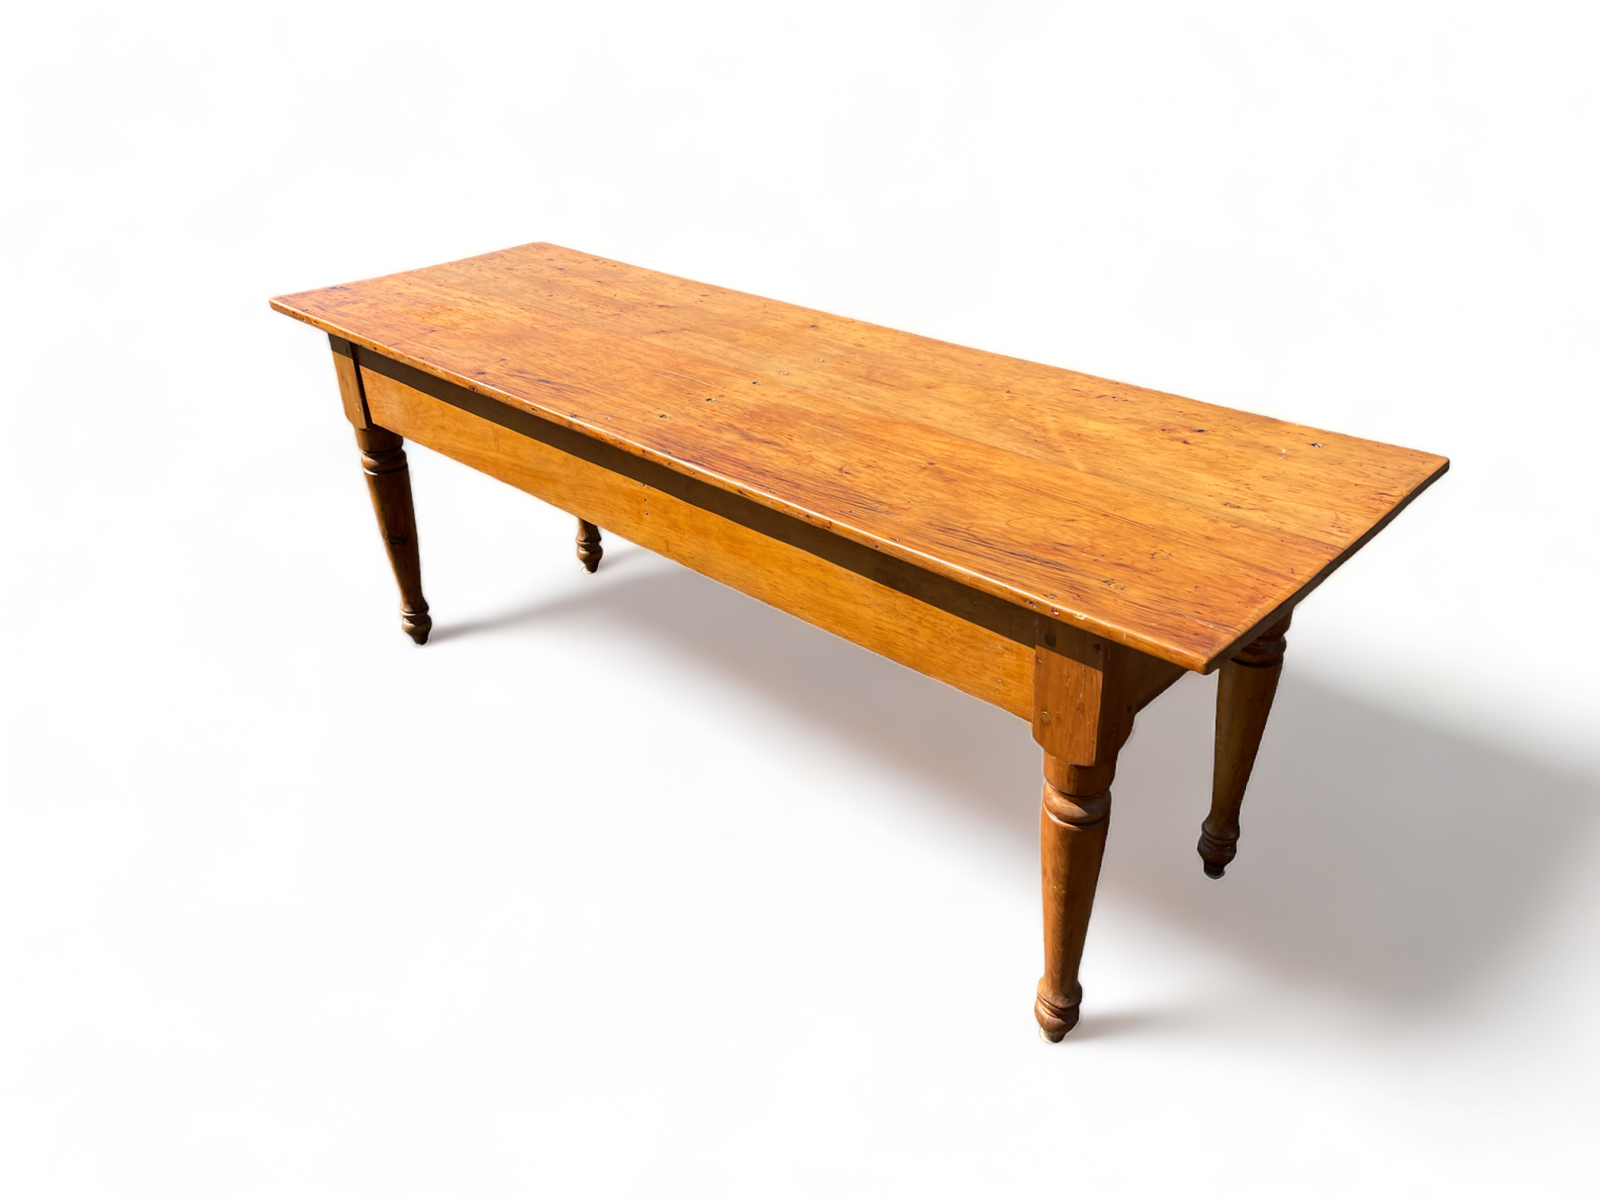 LARGE HARVEST TABLE A rustic  30a088